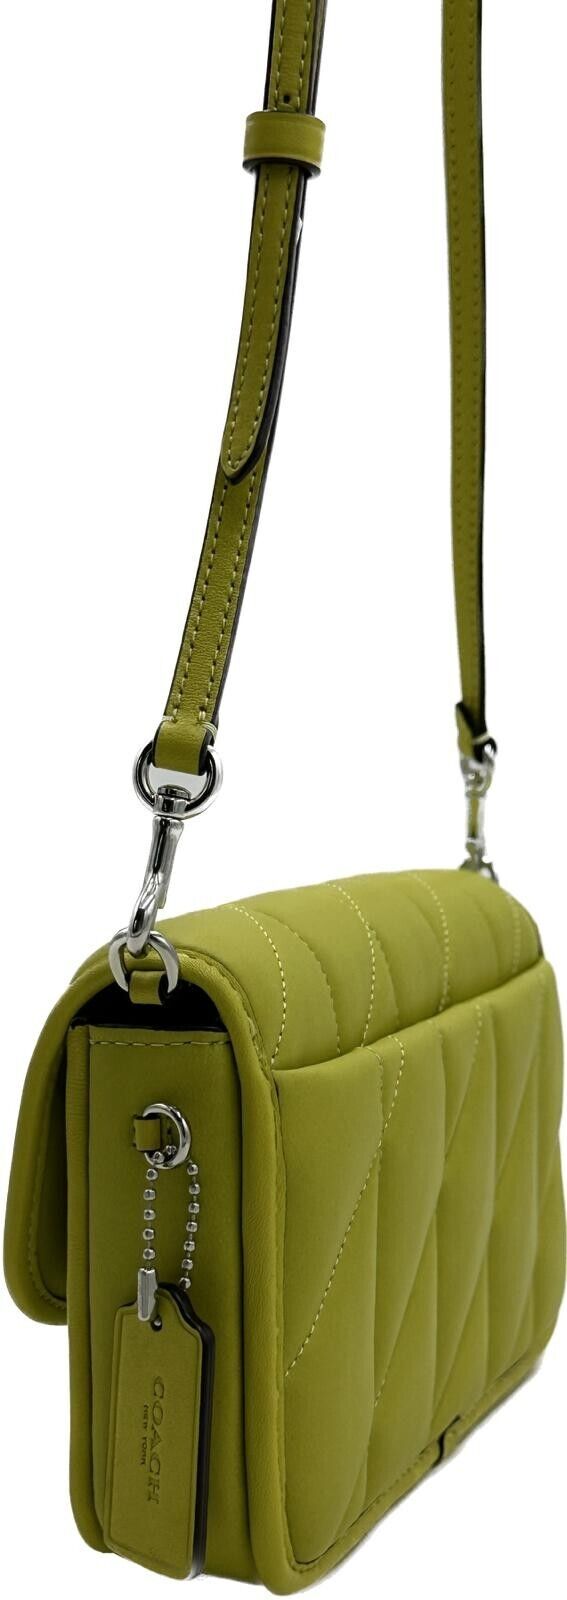 Coach Women's Key Lime Quilted Pillow Leather Hayden Crossbody Purse Bag C8571